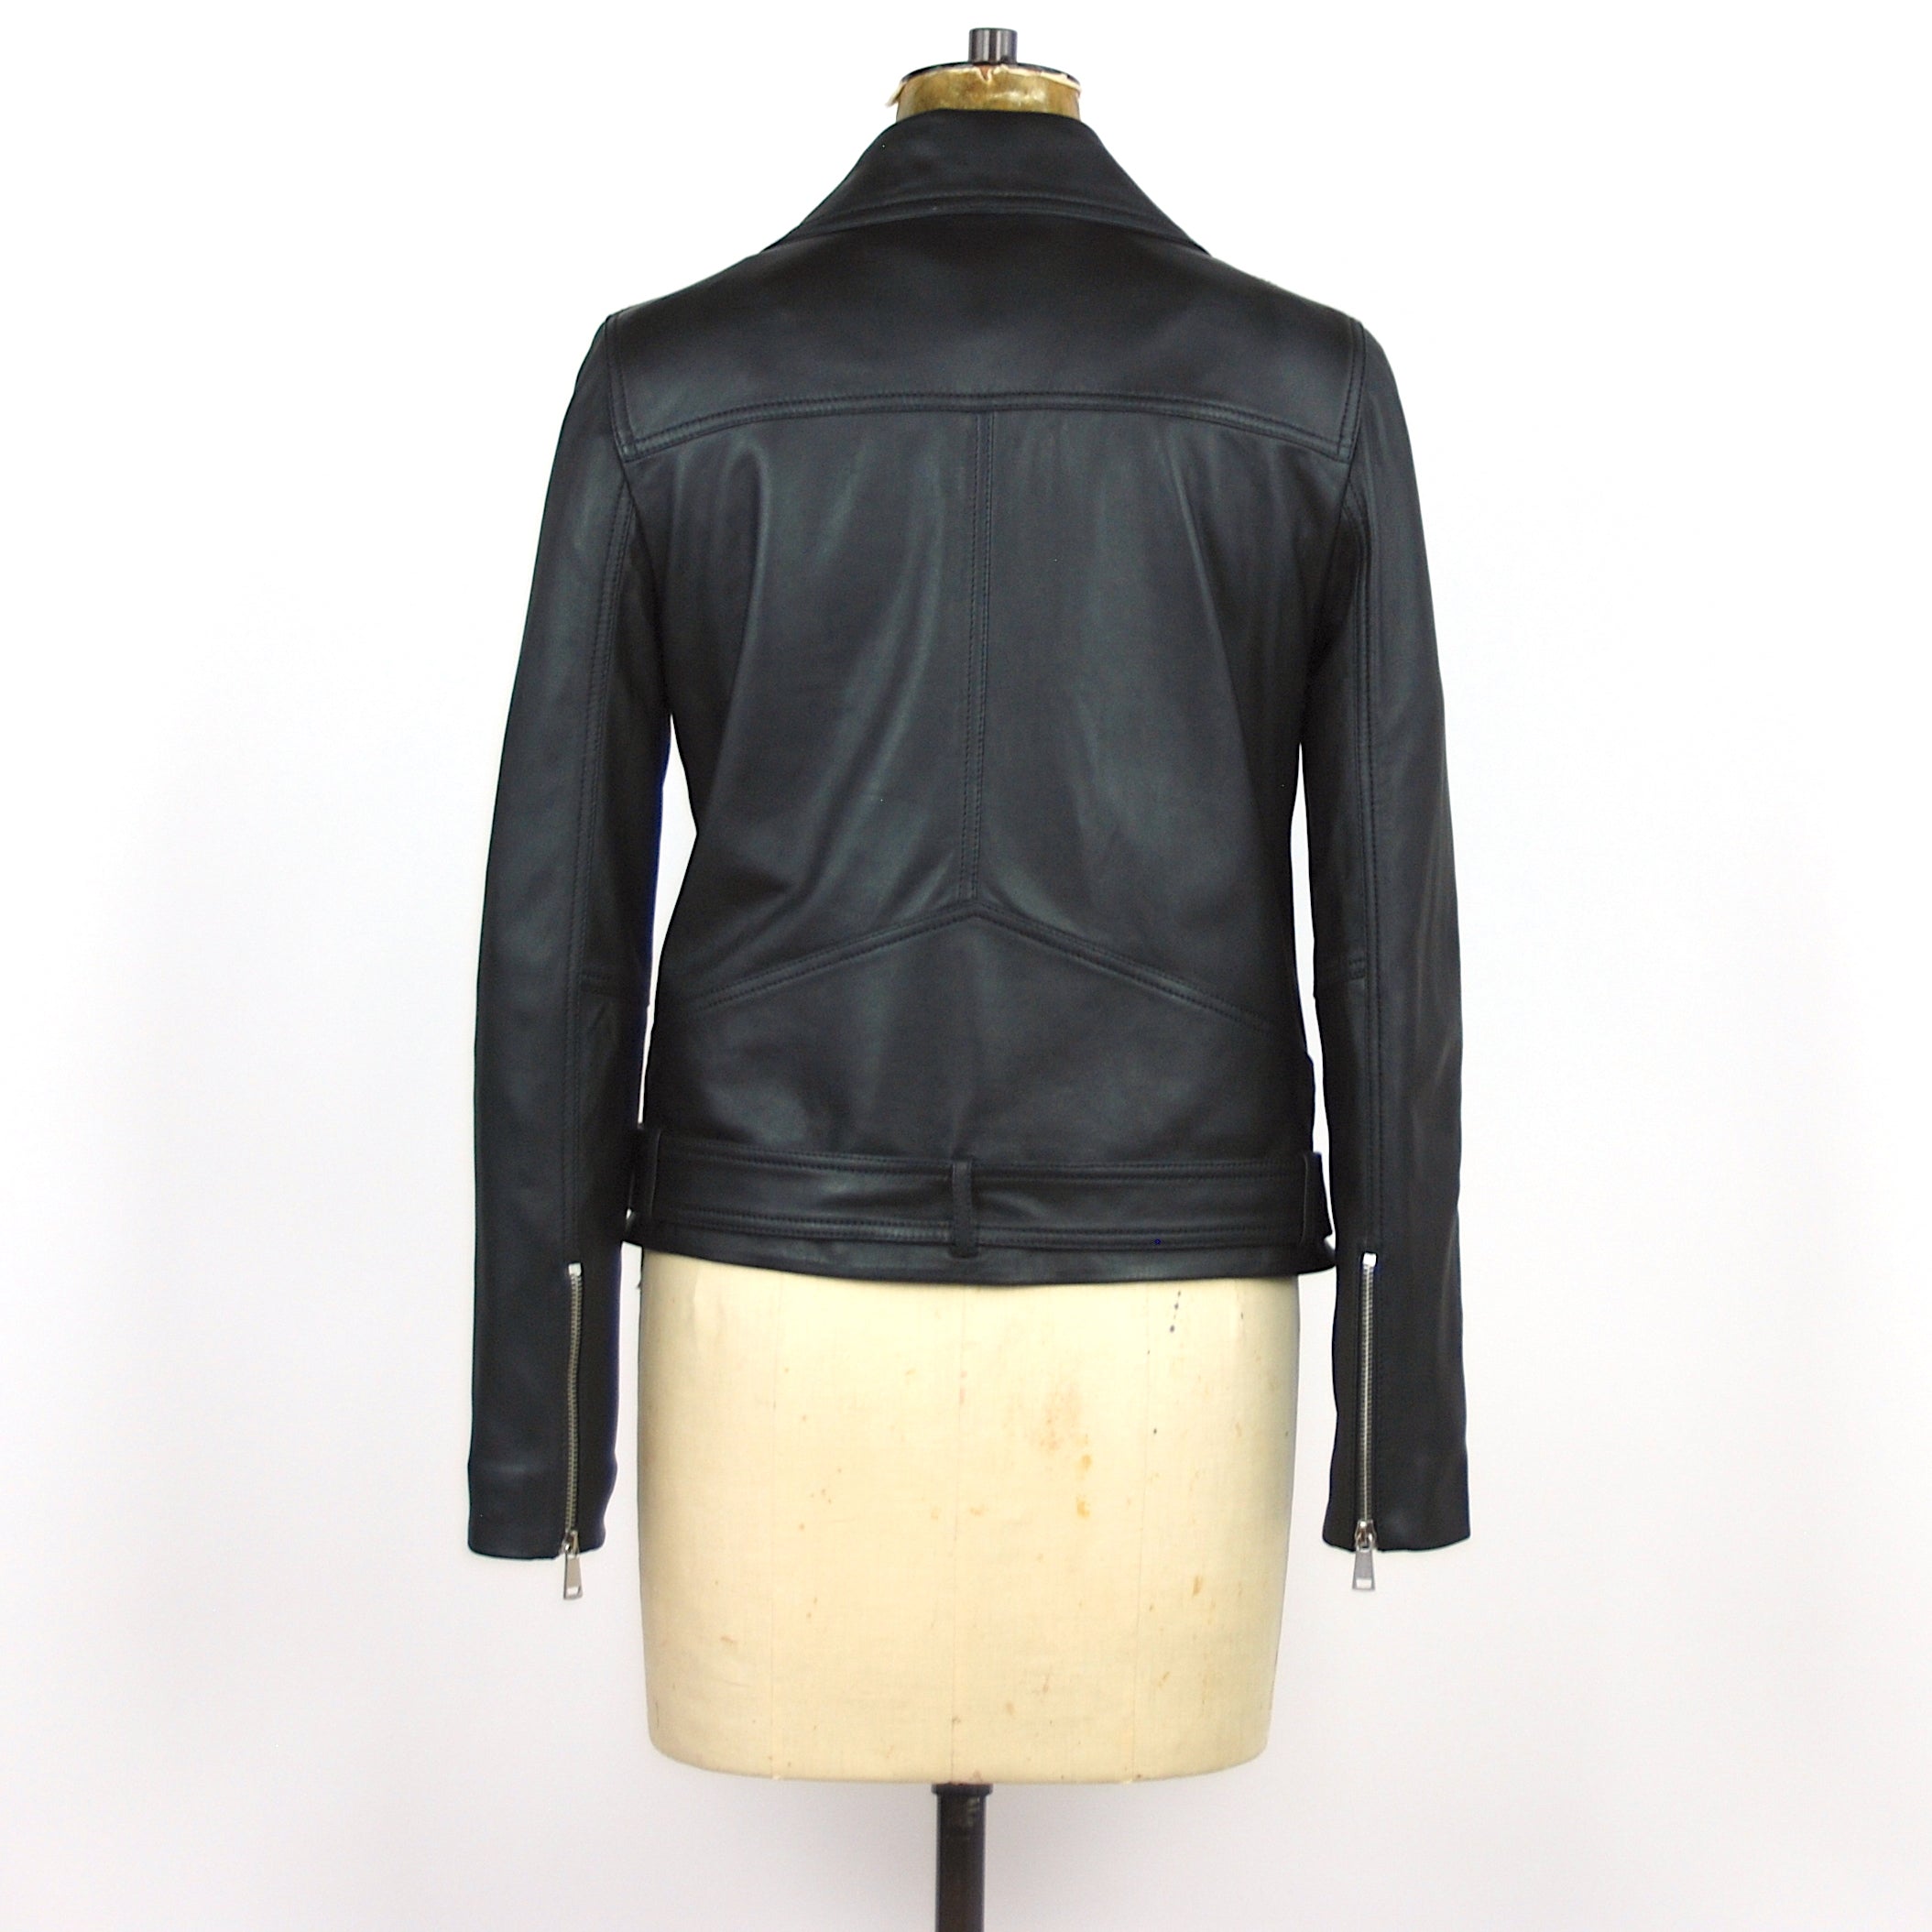 The "I want you back" classic belted biker jacket